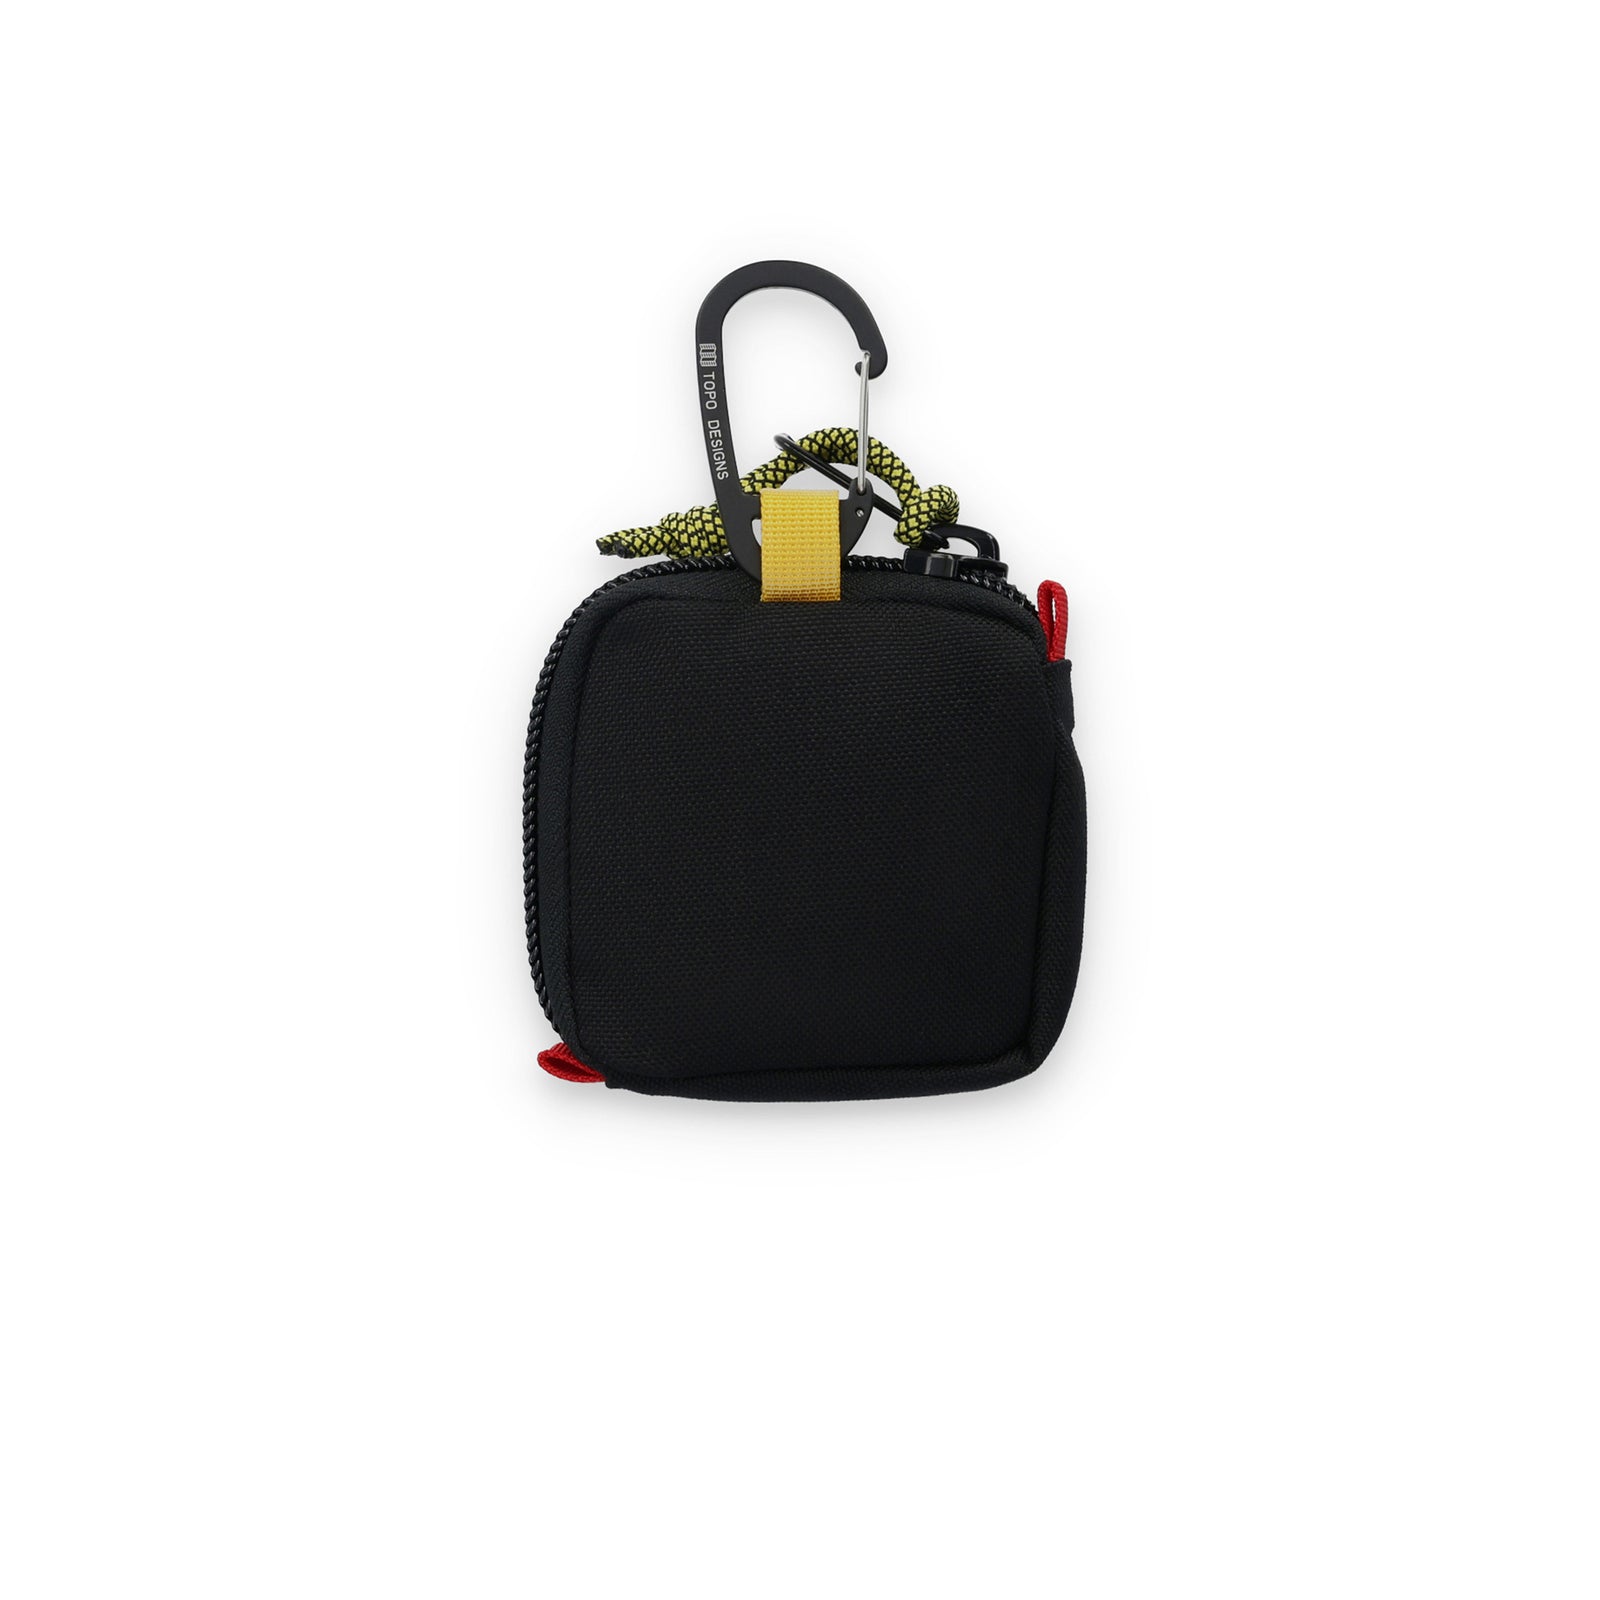 Back of Topo Designs Square Bag carabiner clip keychain wallet in recycled "Black" nylon.